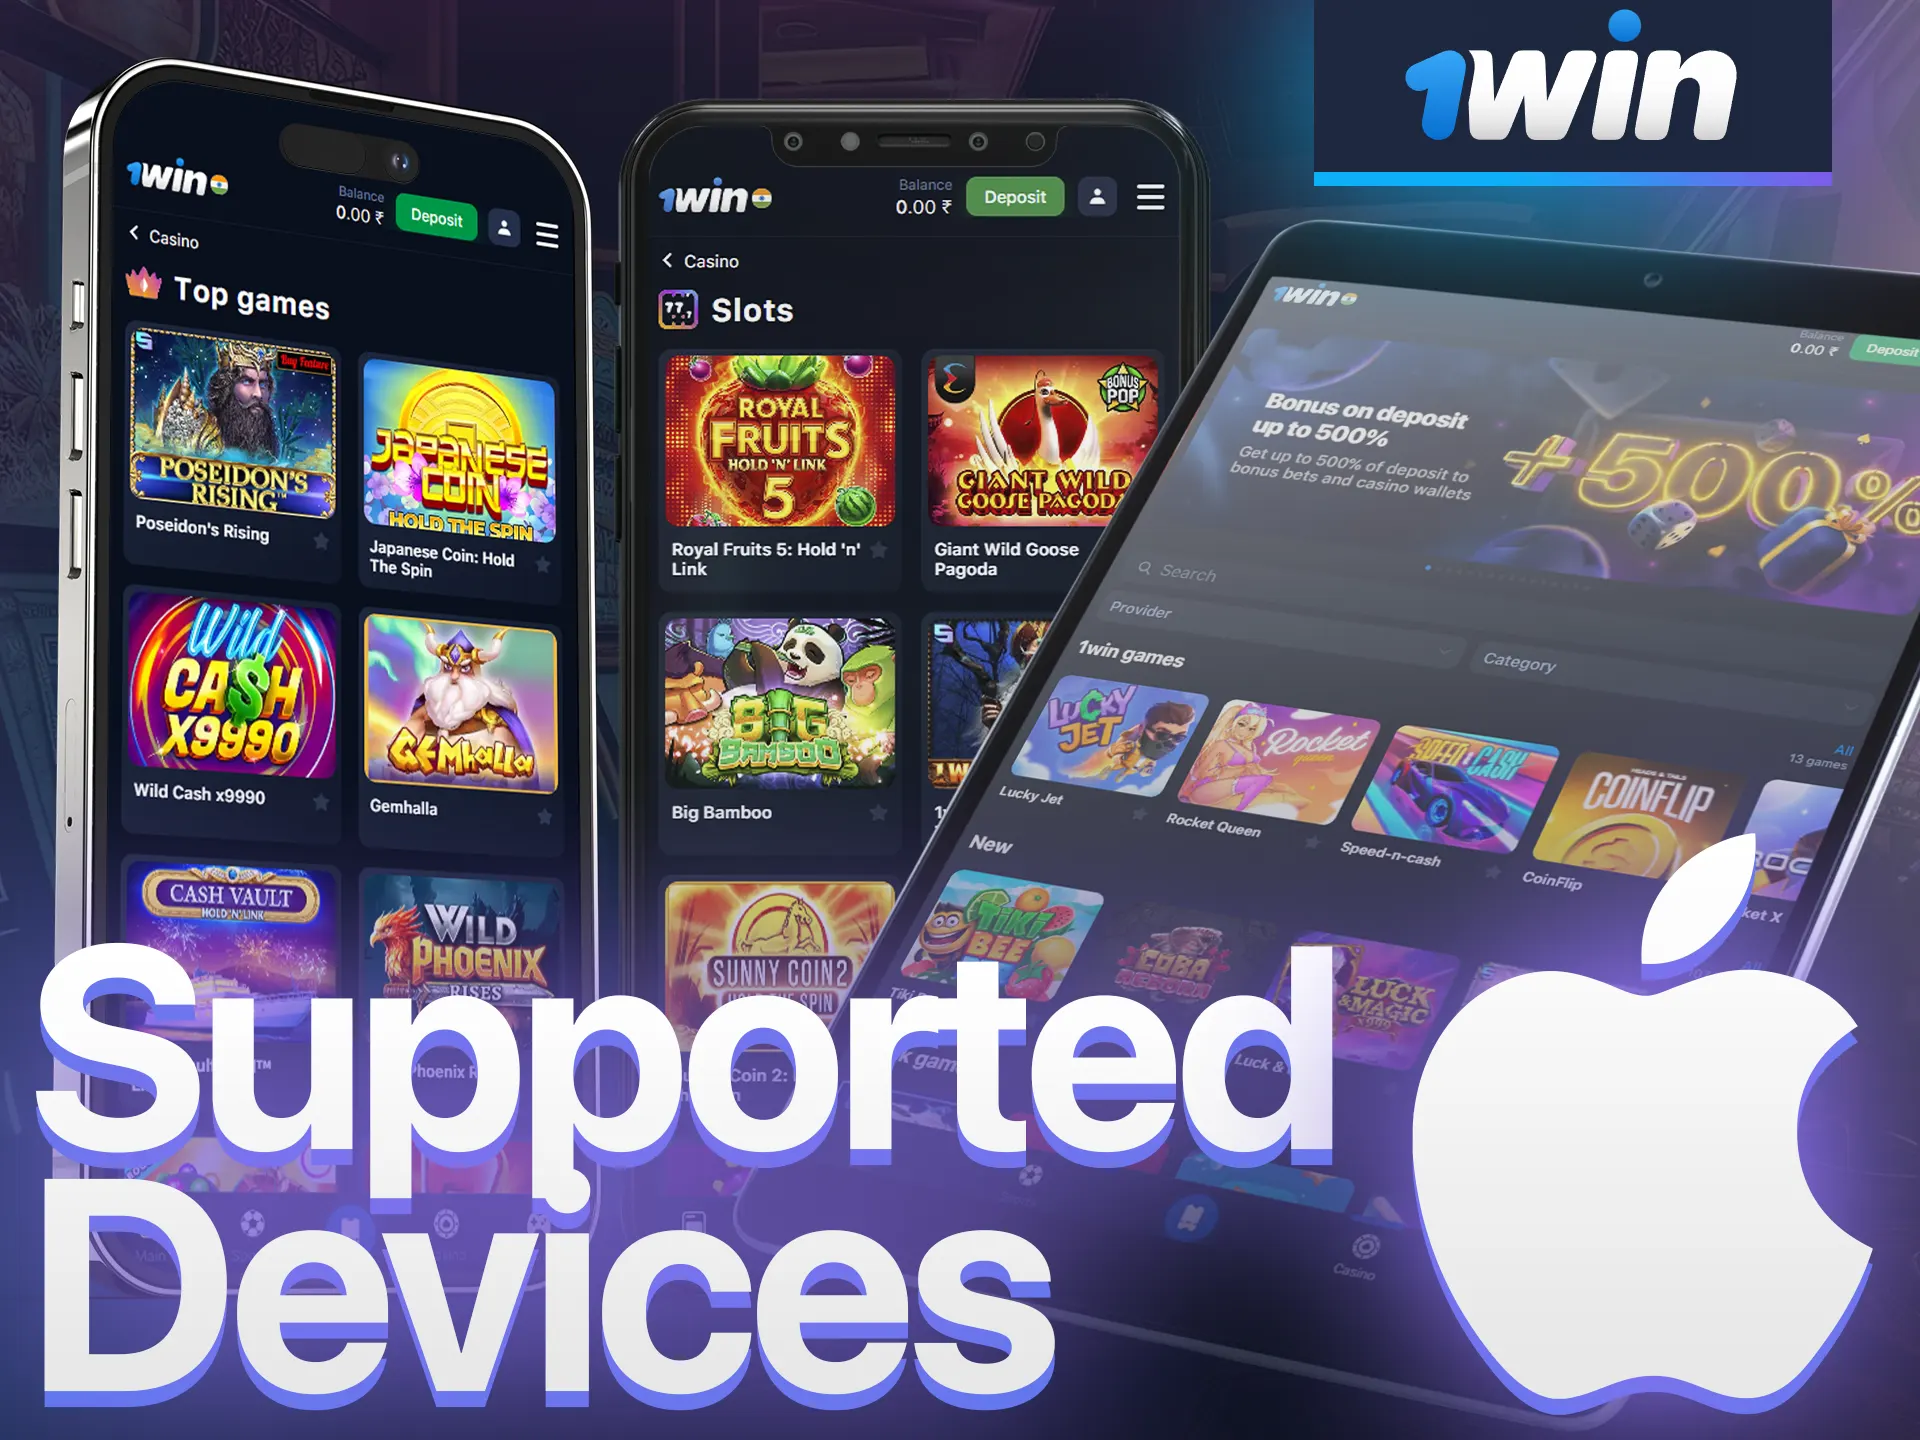 Download the 1win app to your iOS device.